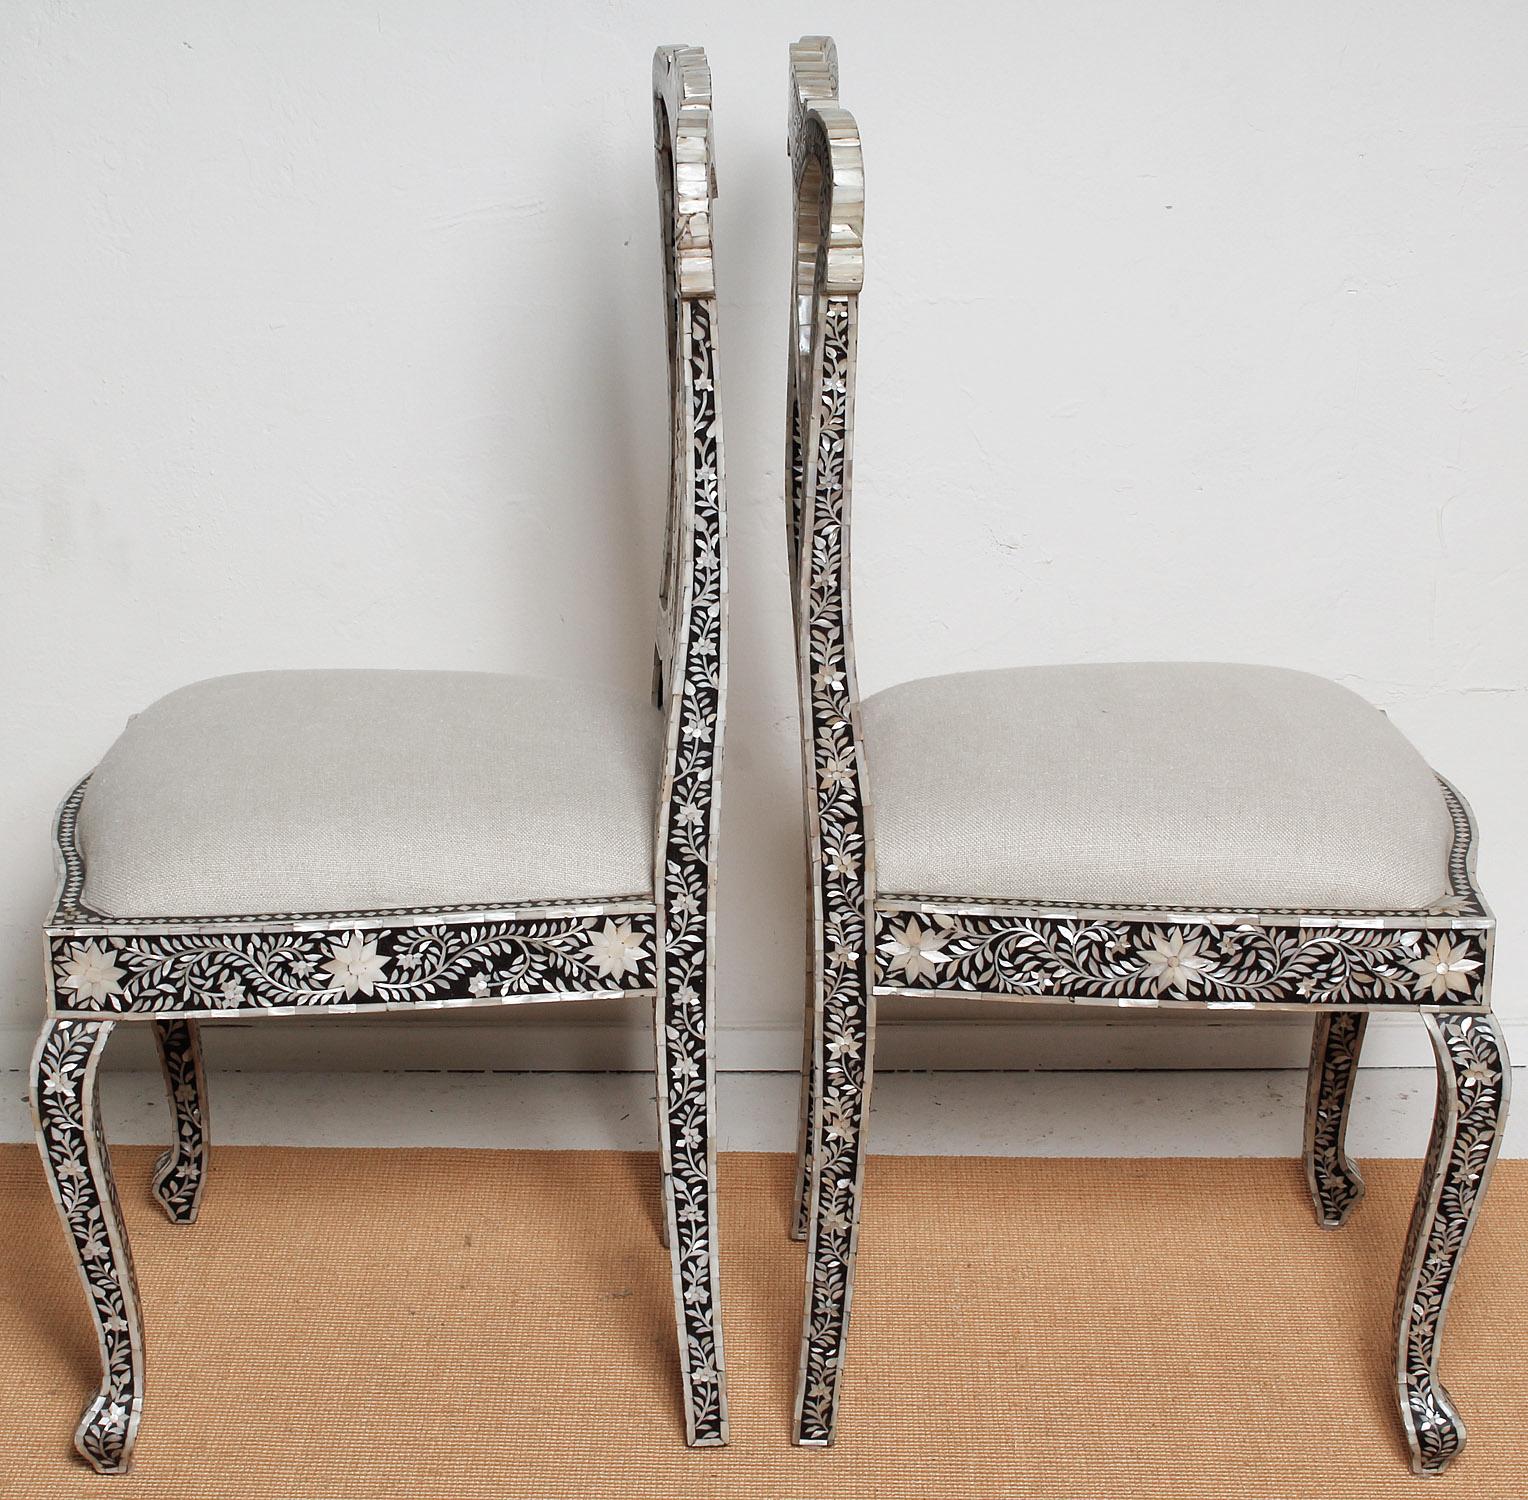 Inlay Mid-20th Century Anglo Indian Mother of Pearl Chairs